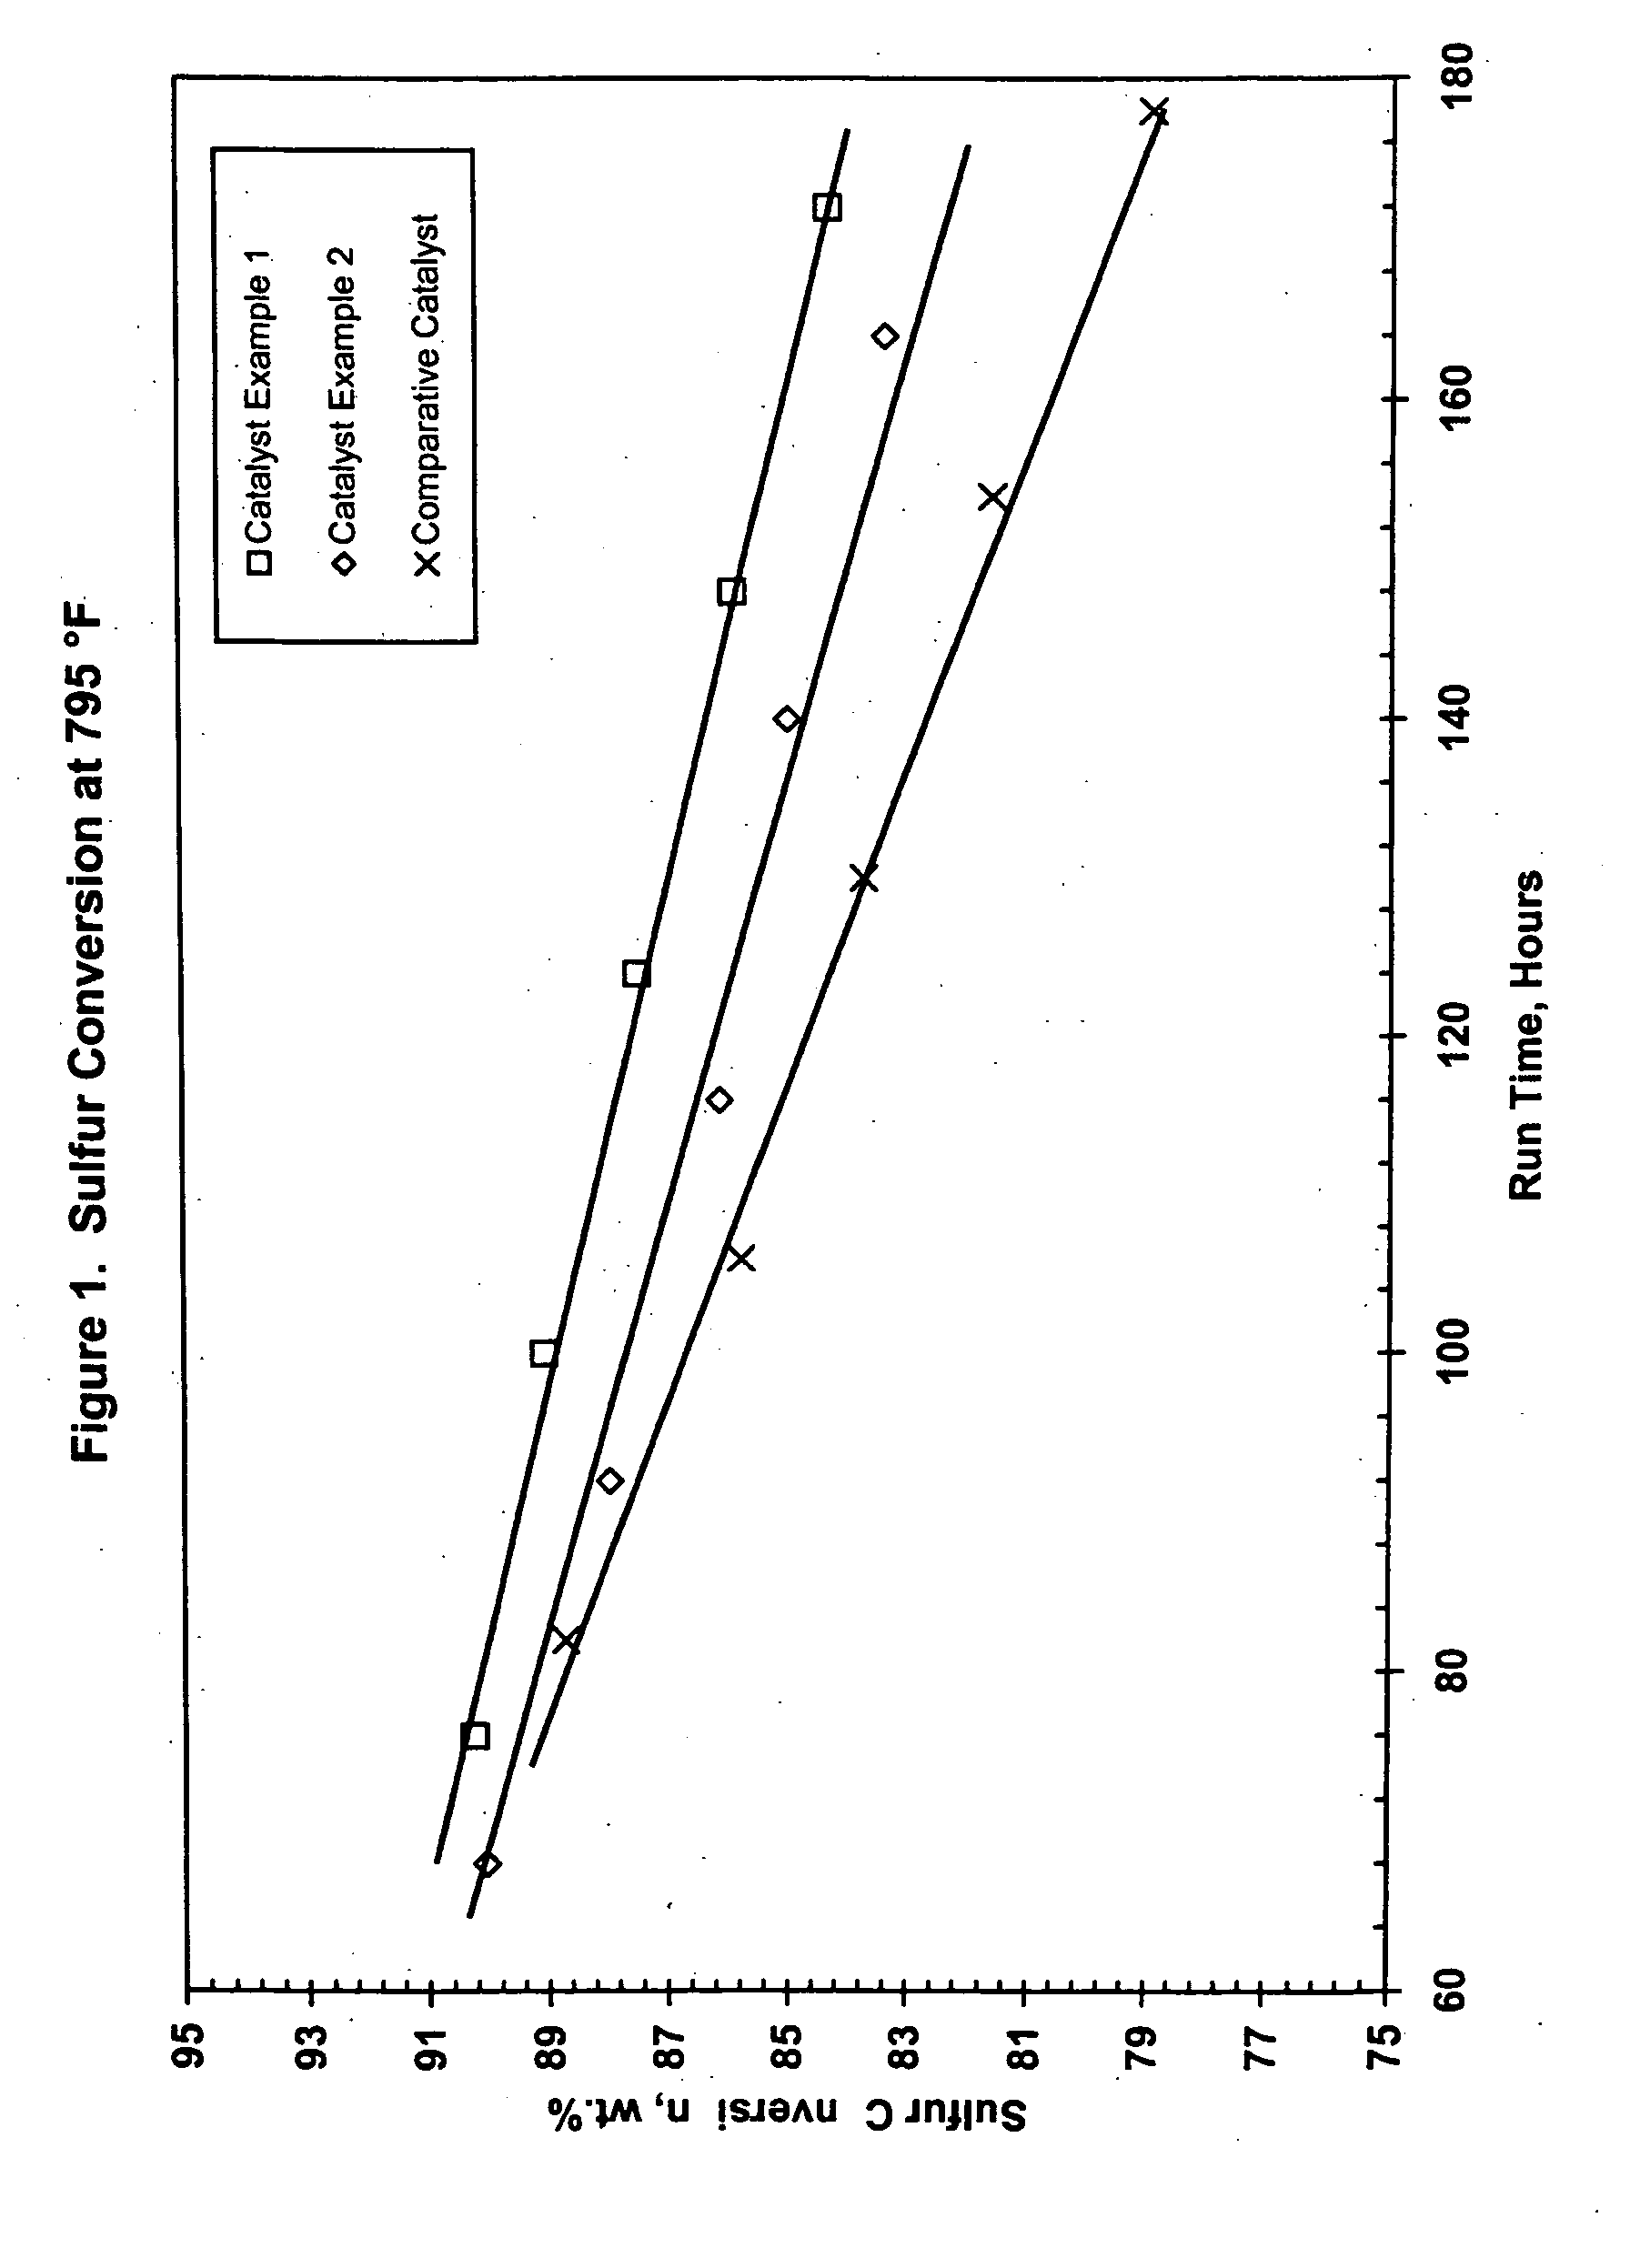 Hydroconversion catalysts and methods of making and using same